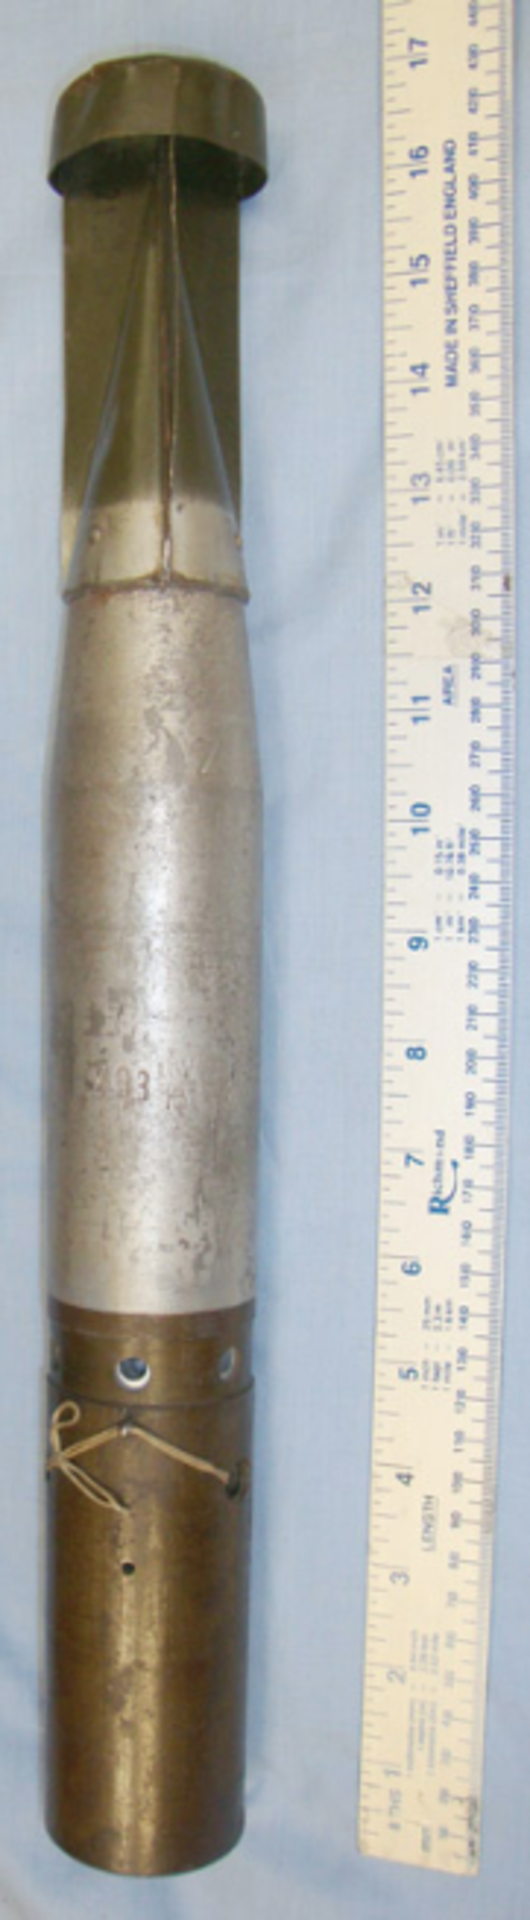 WW2, 1940 Dated German Tilebreaker Incendiary Bomb With Rare Inert Anti personnel Bomb/Booby Trap.